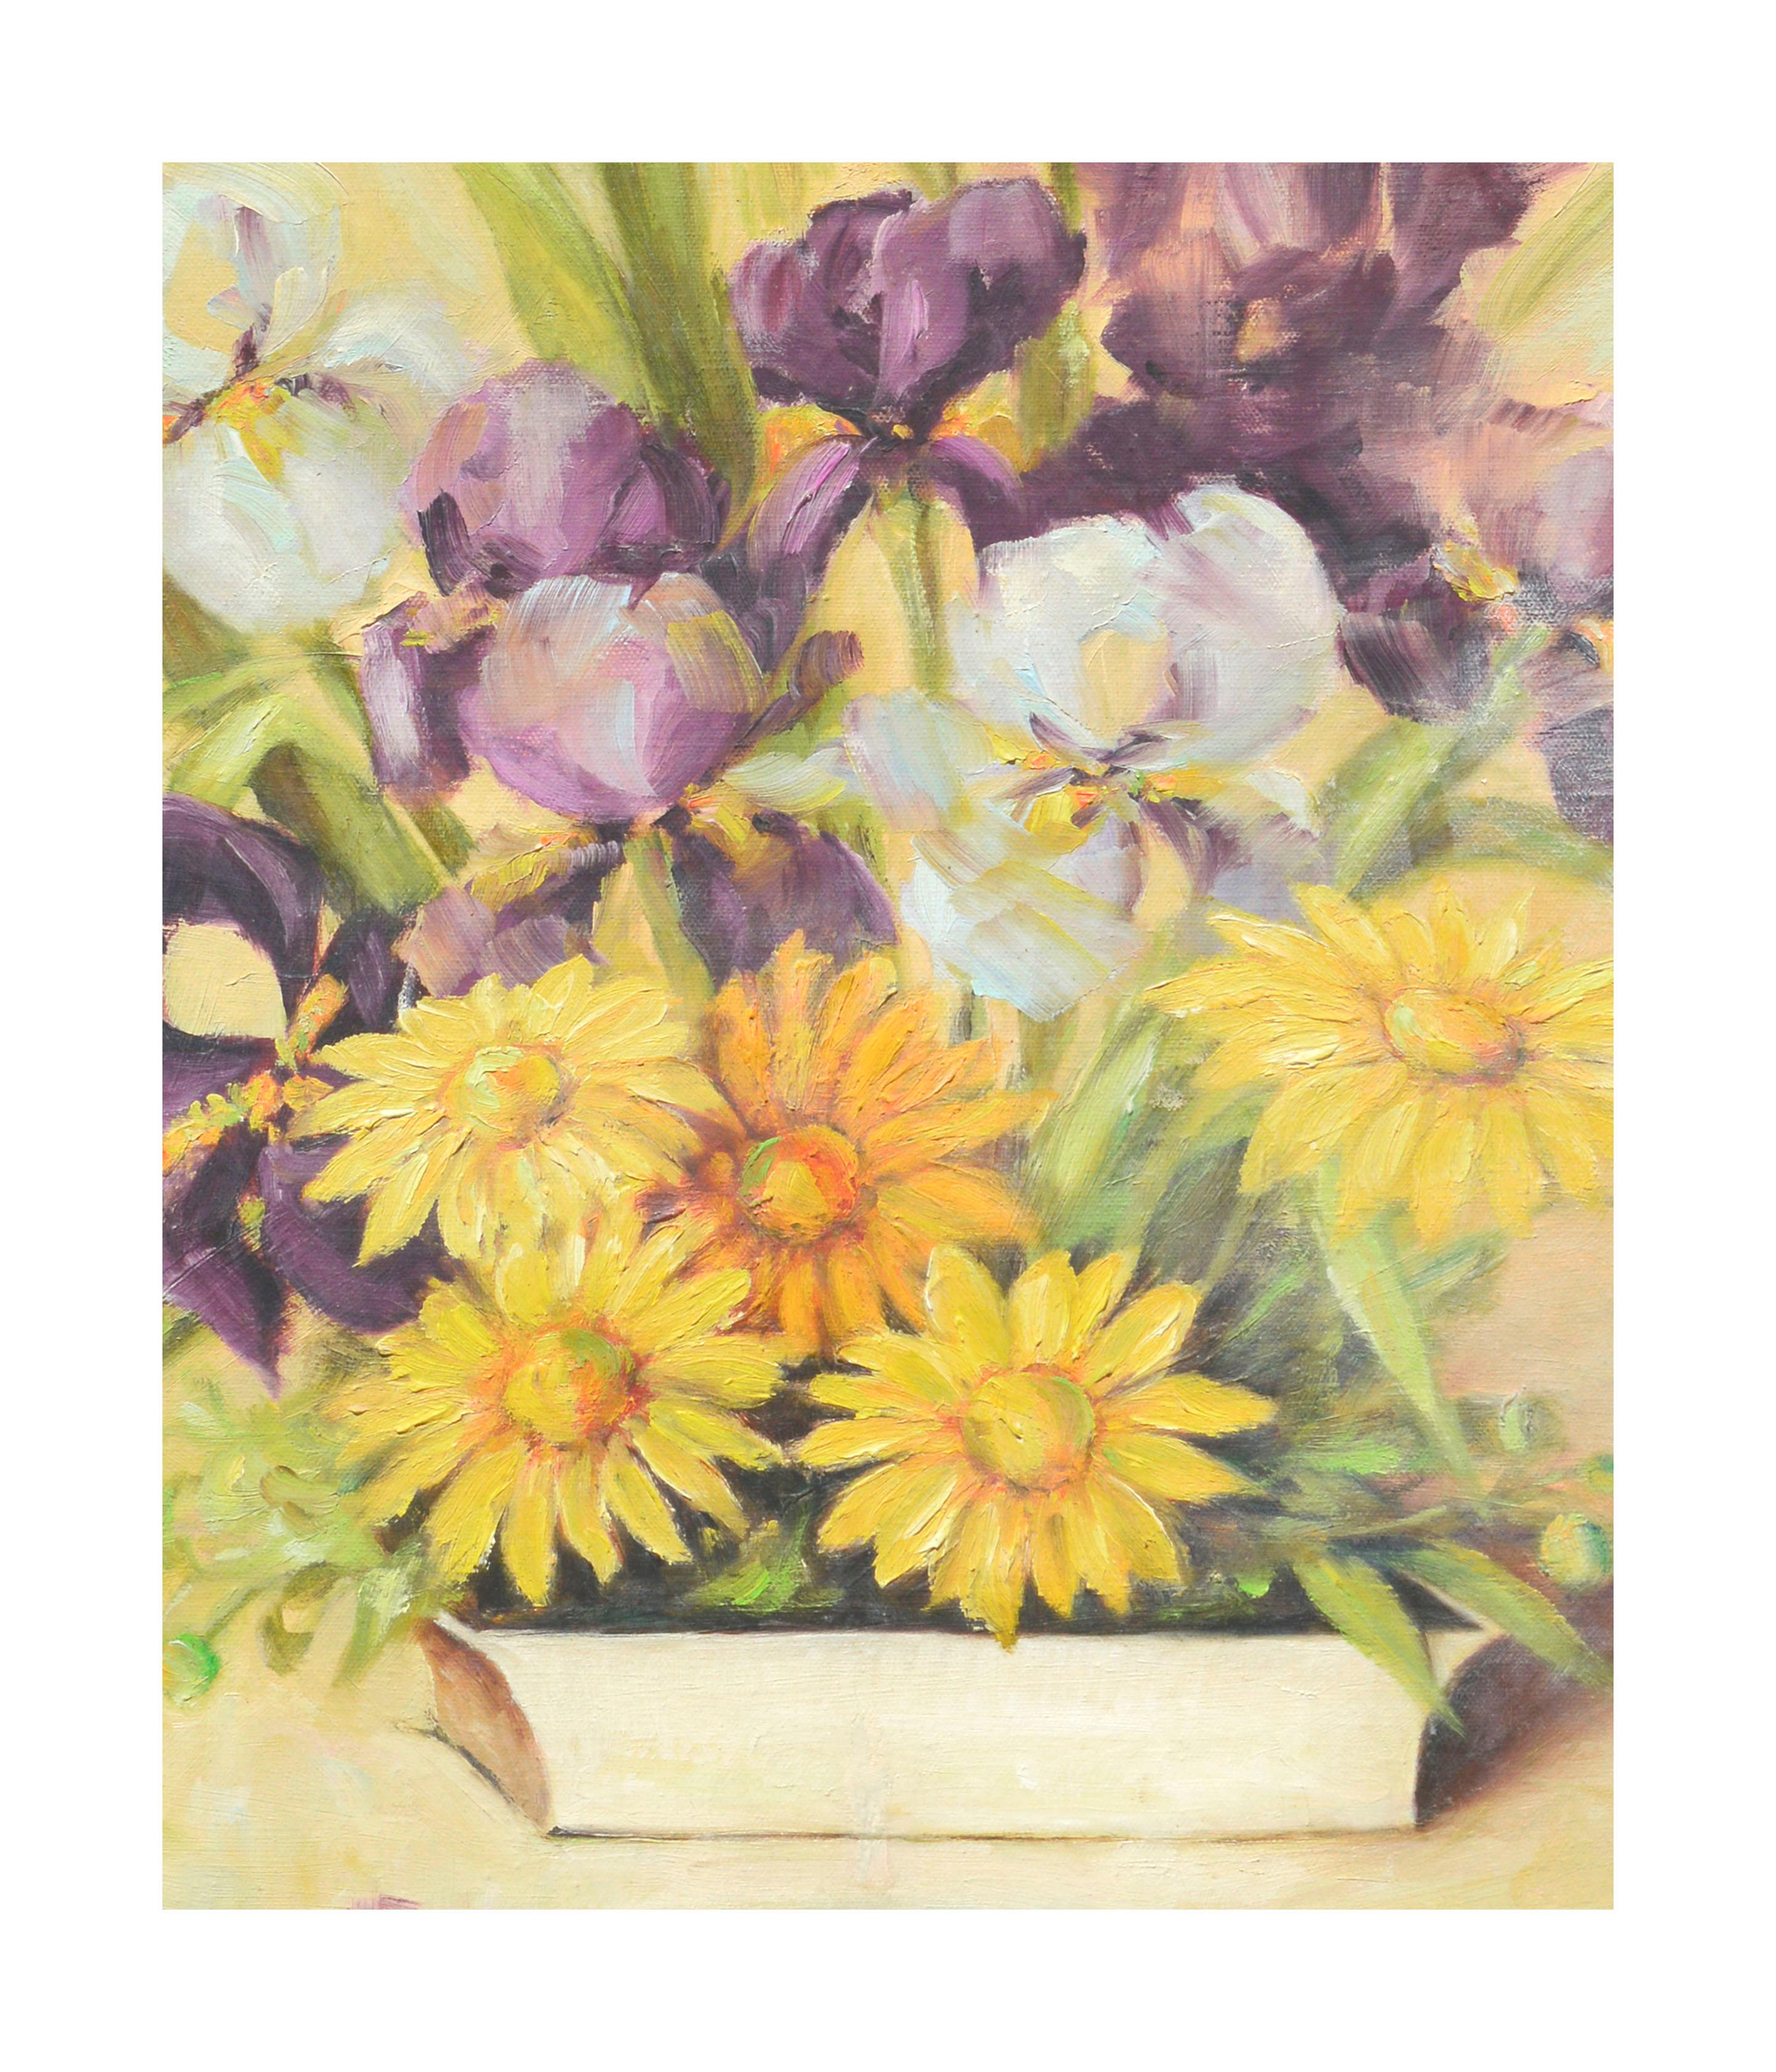 Vintage Irises and Daisies Still Life - Painting by Winona Cappell 